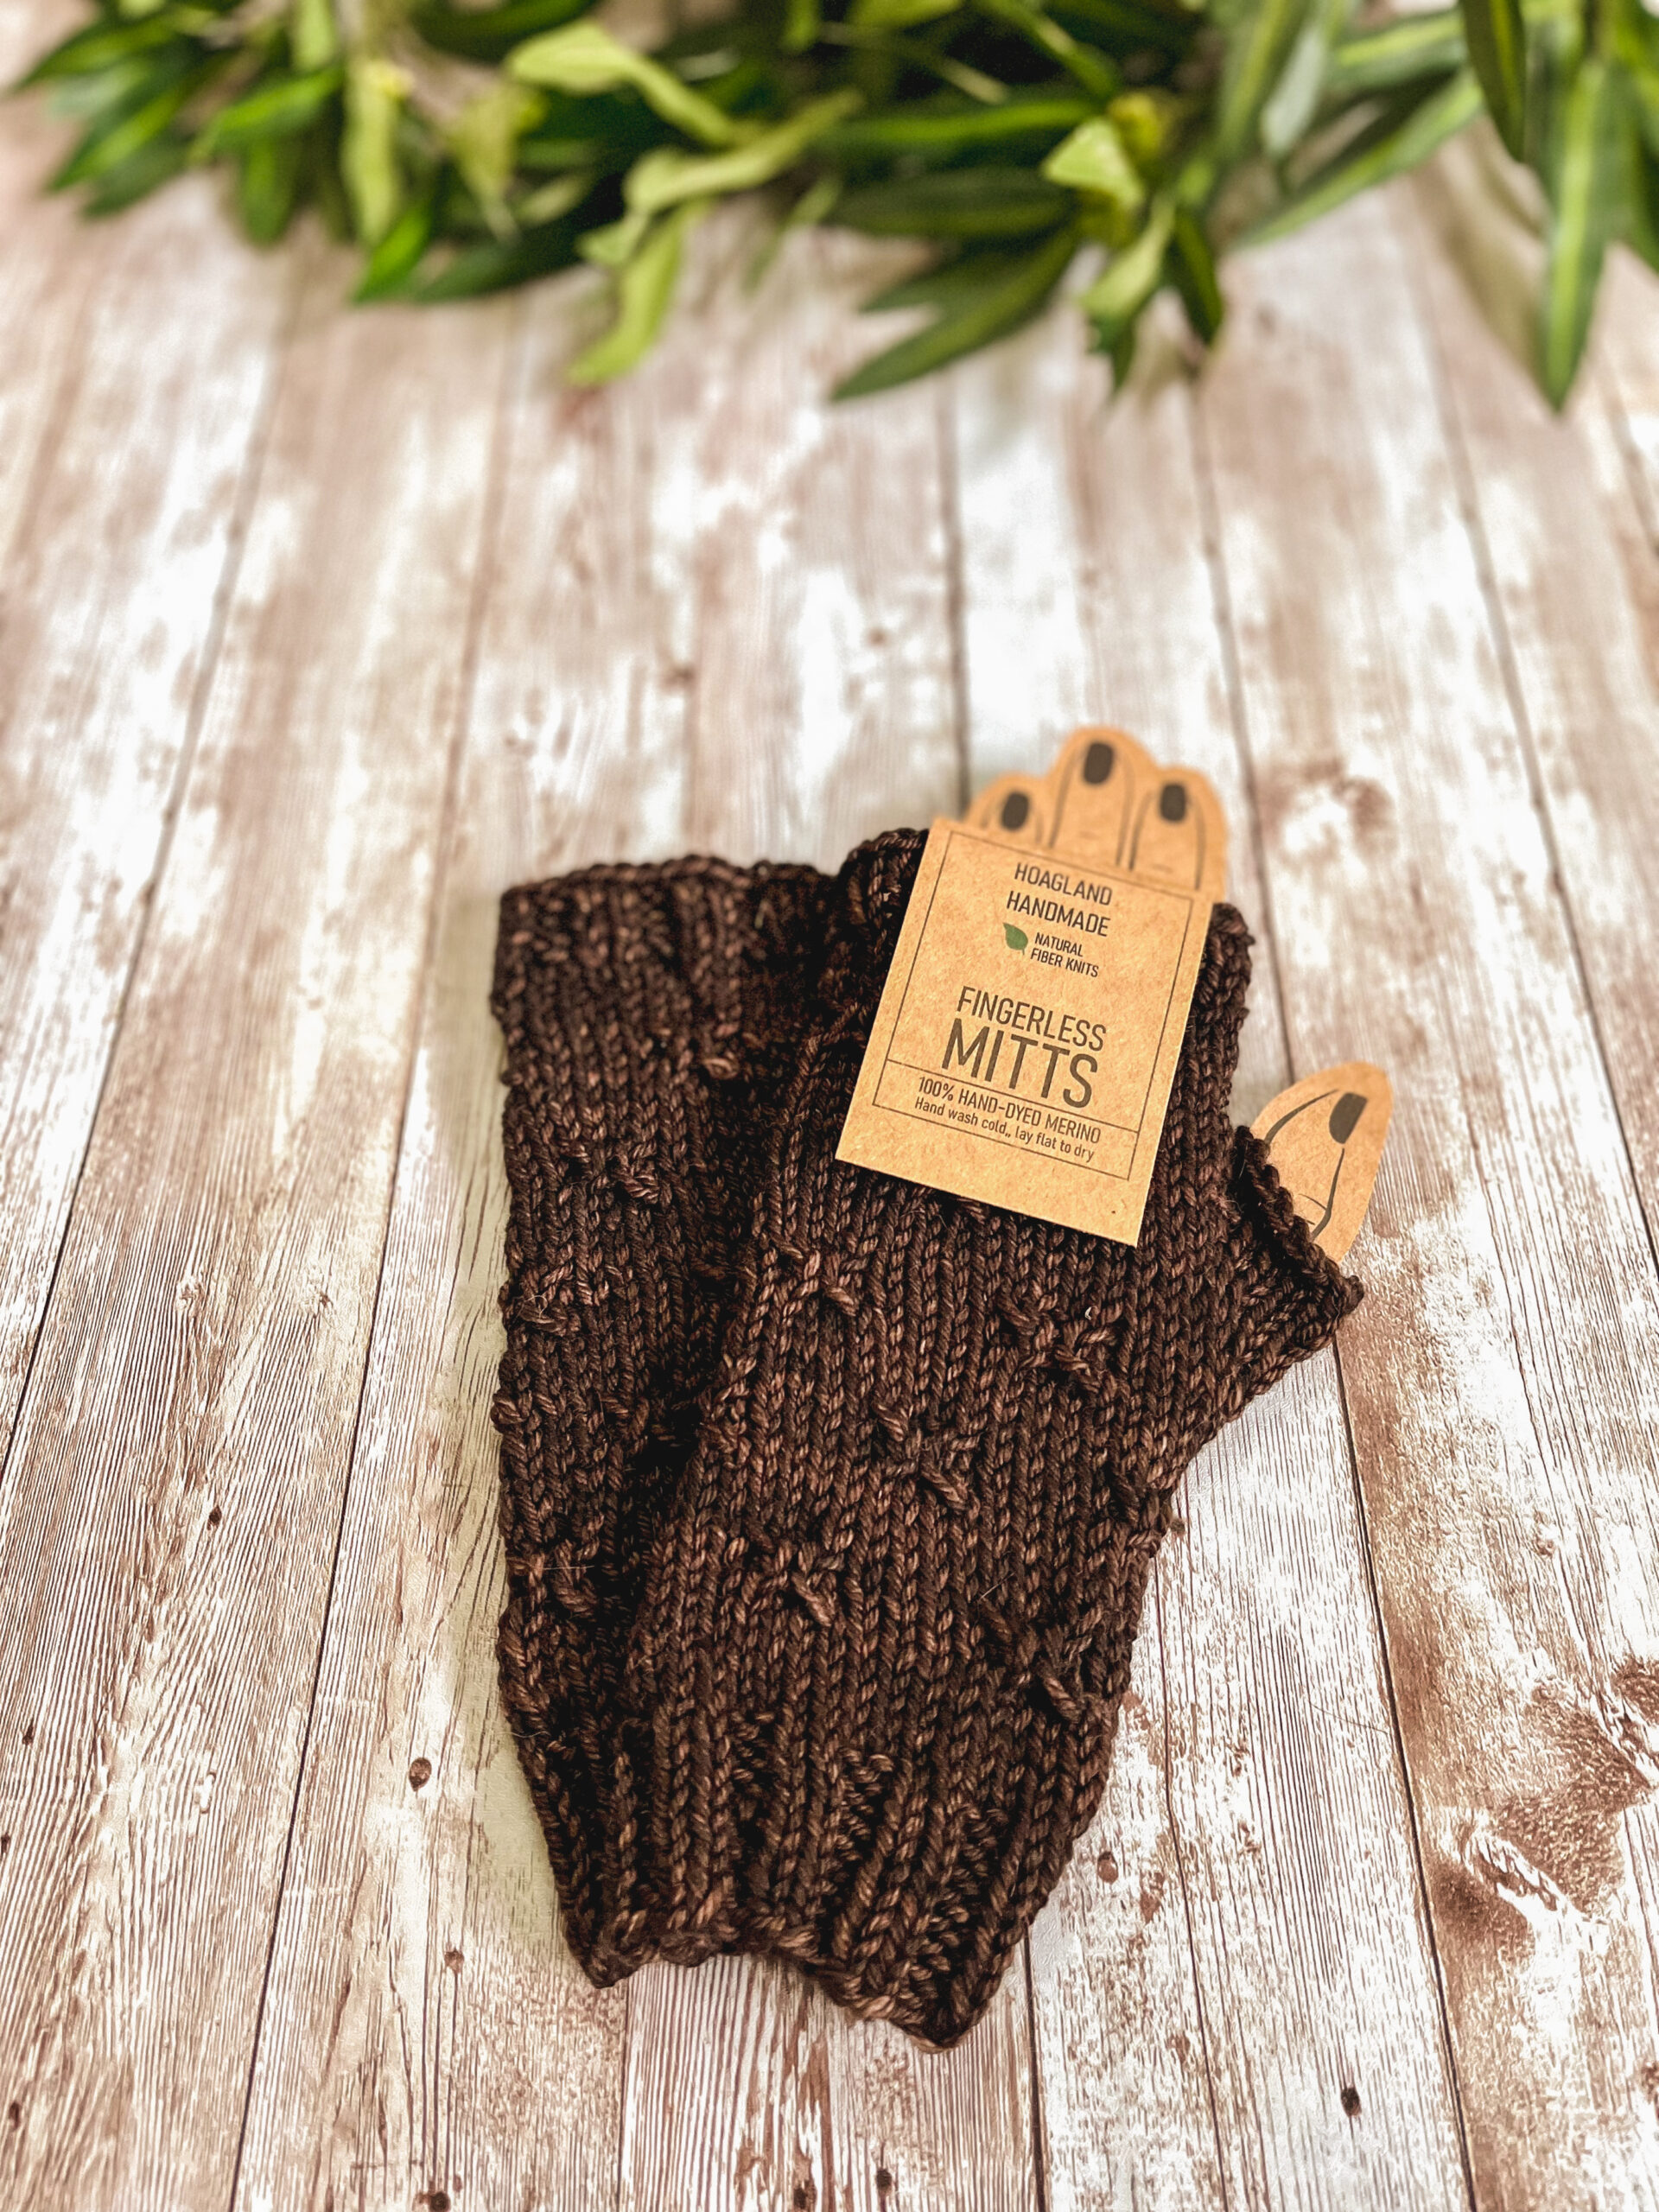 A pair of brown fingerless mitts with a decorative gathered pattern sit on a wood plank with greenery in the background. There is a tag at the top that reads Hoagland Handmade, Natural Fiber Knits, Fingerless Mitts 100% hand dyed merino